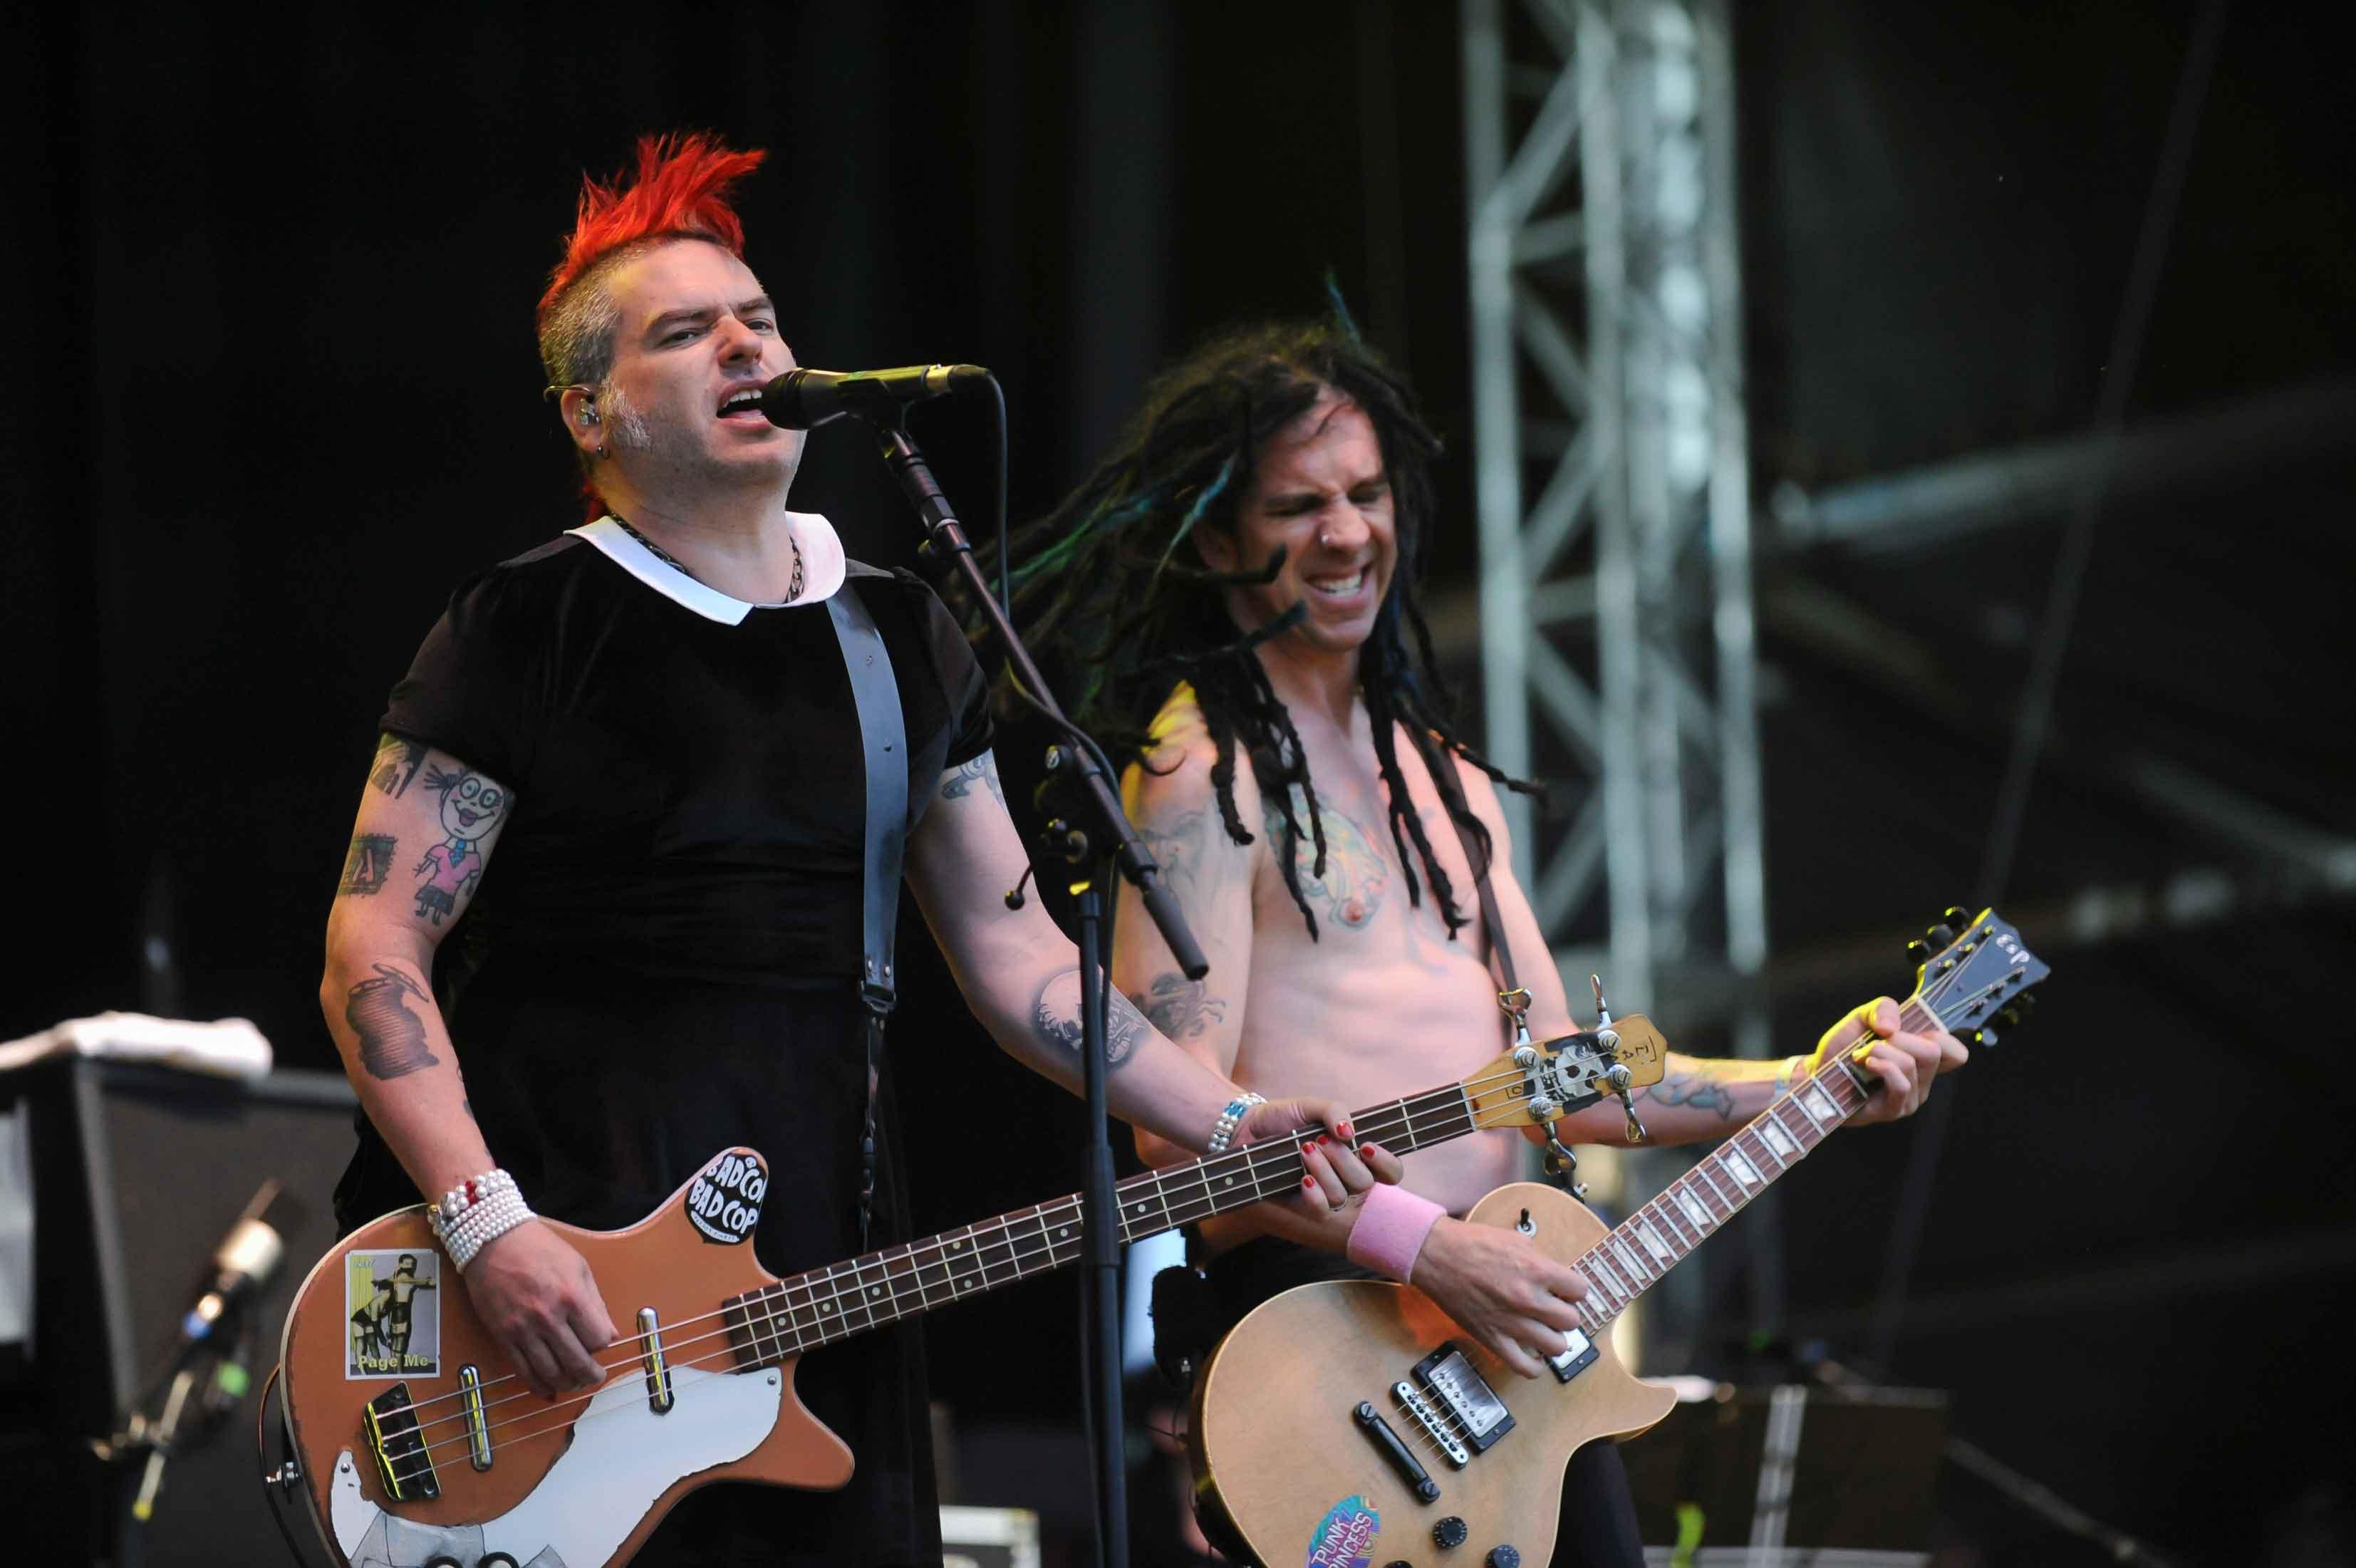 NOFX Loses Brewing Co. and Festival Sponsor Over Las Vegas Shooting Comments